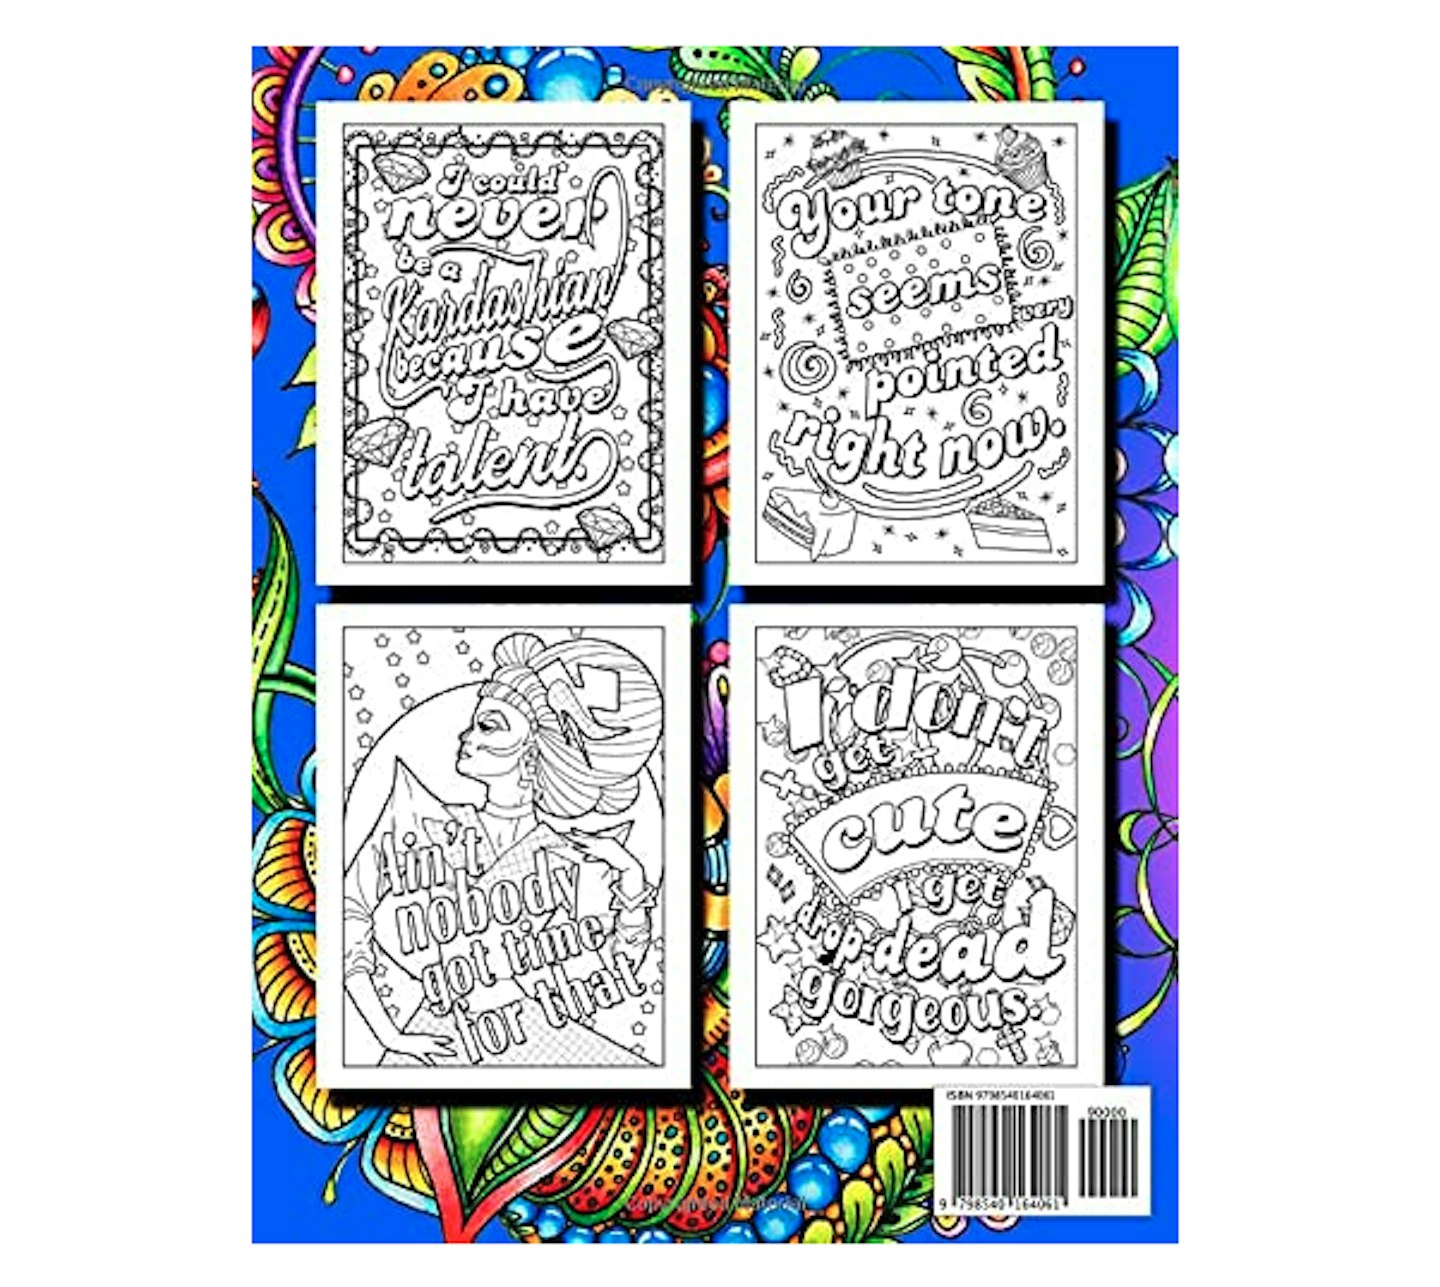 Rupaulu2018s Drag Race Quotes Coloring Book